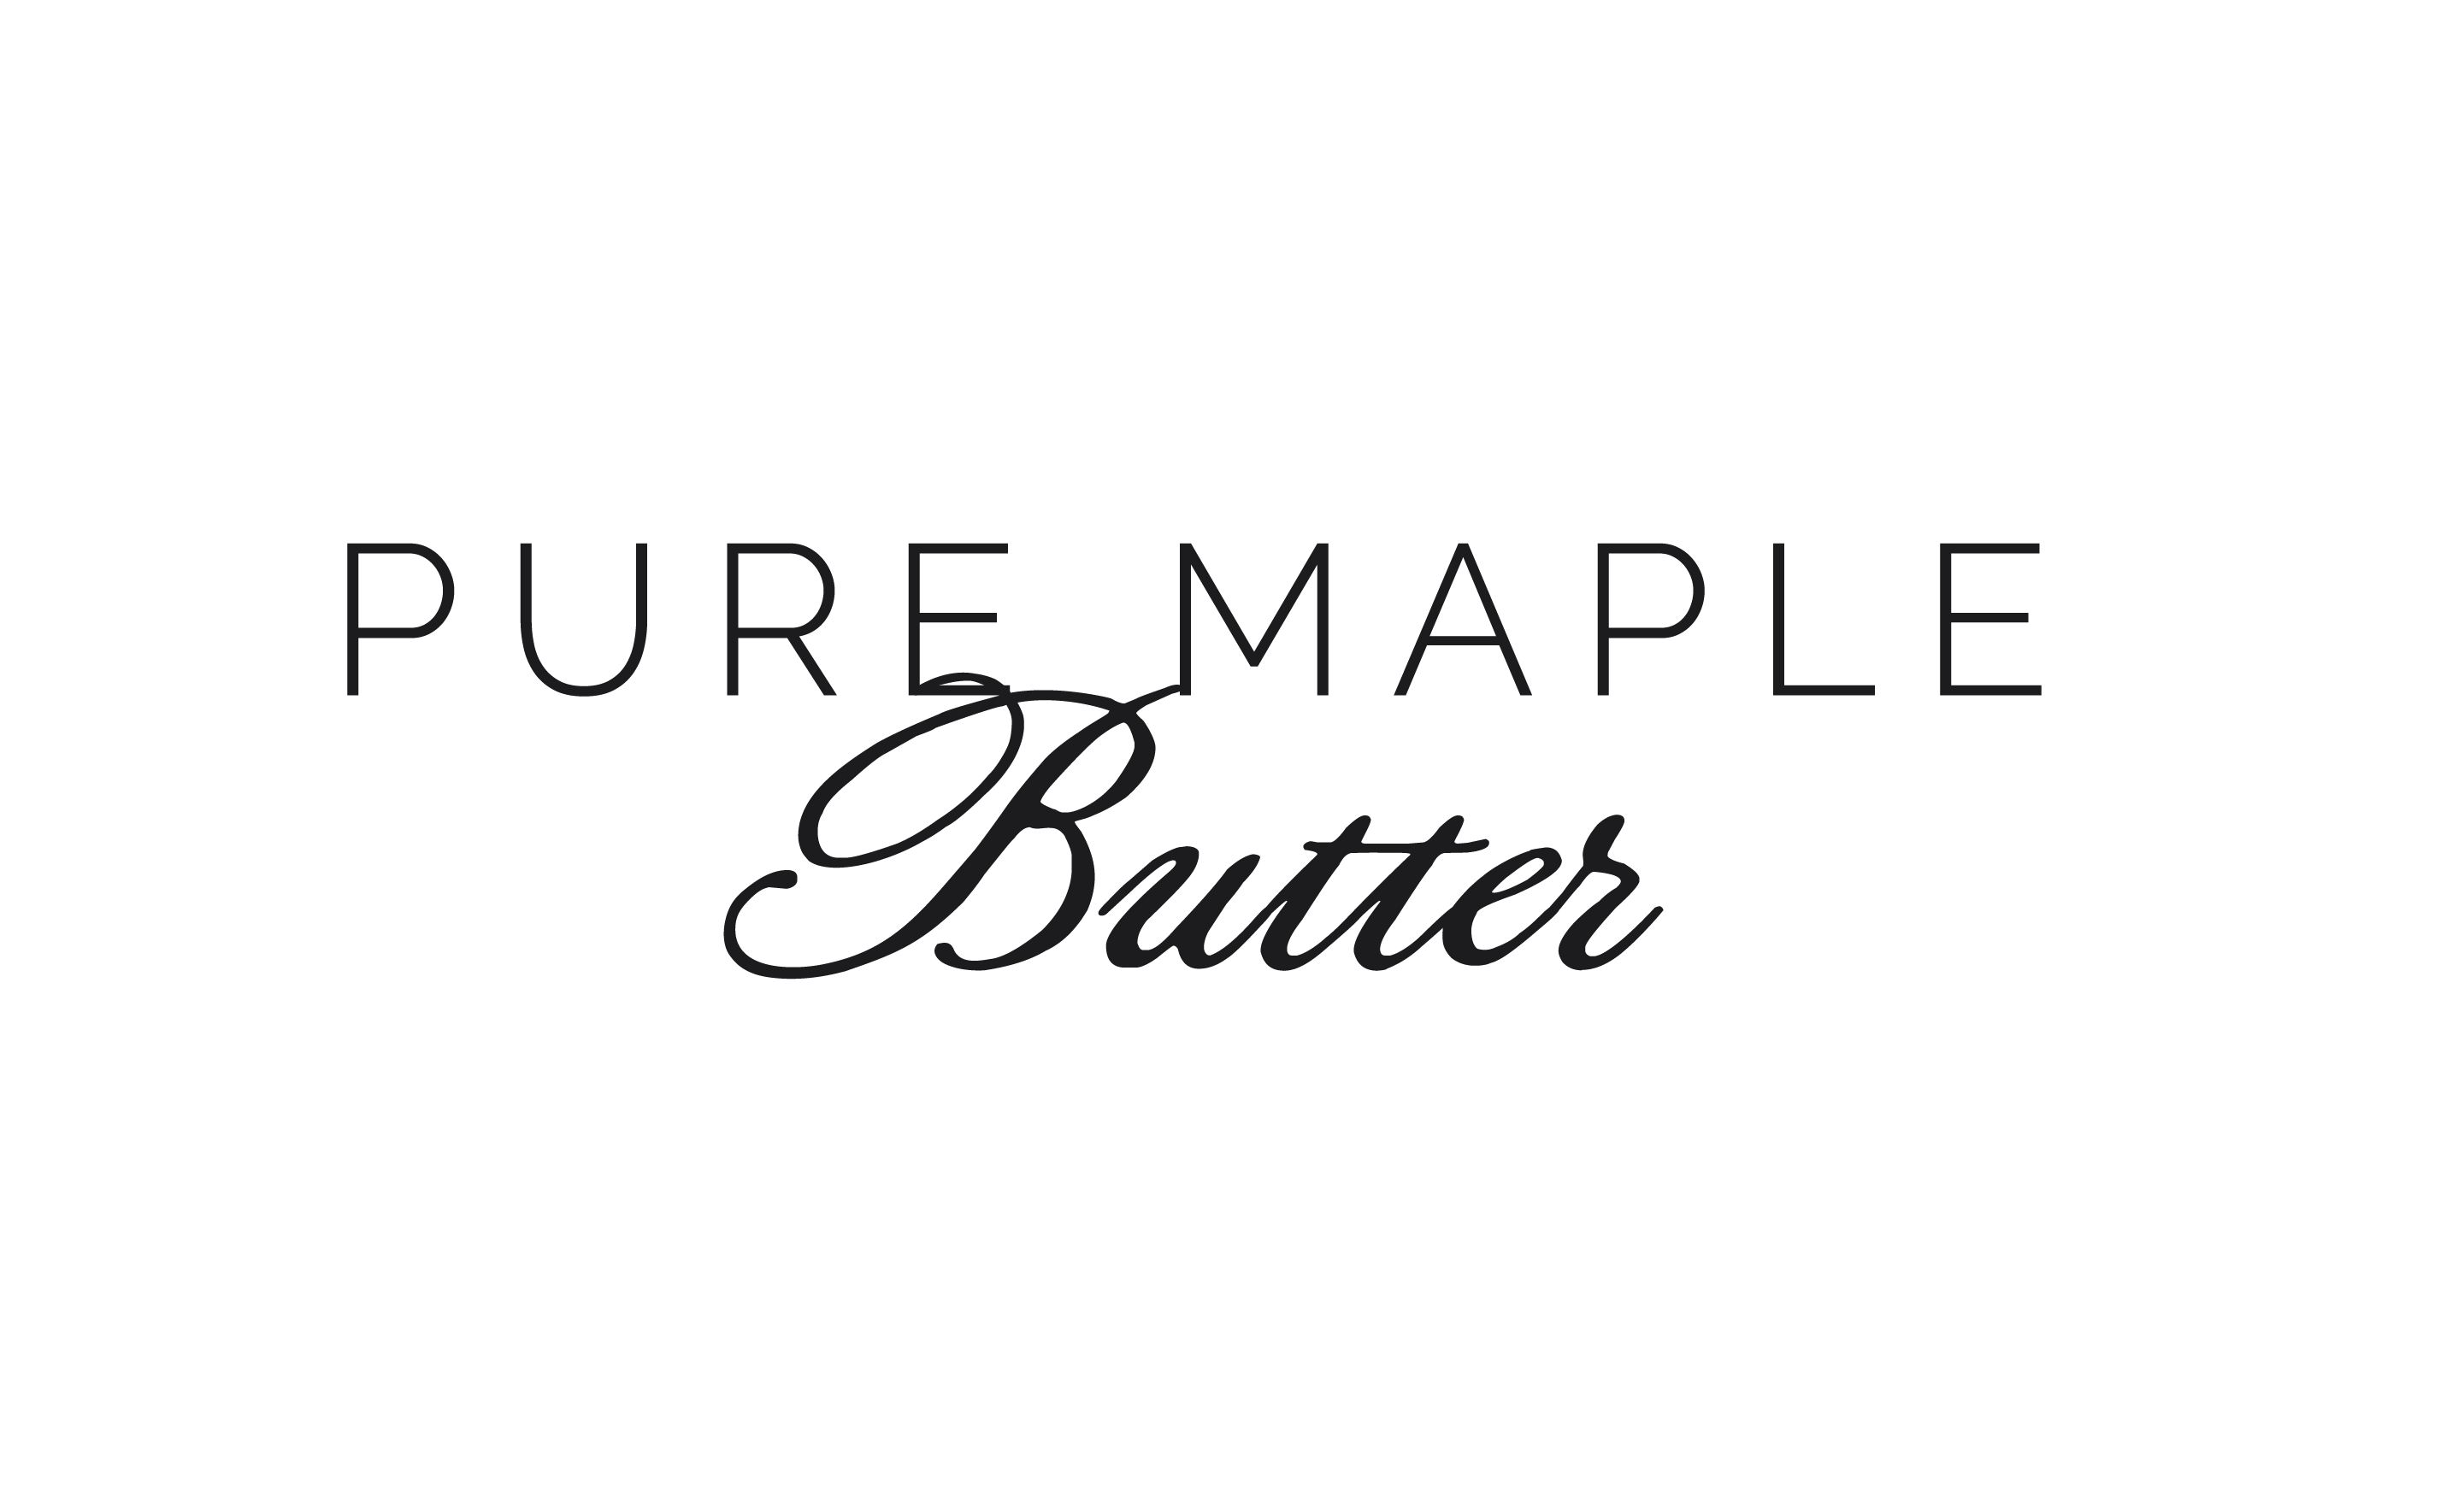 Pure Maple Butter